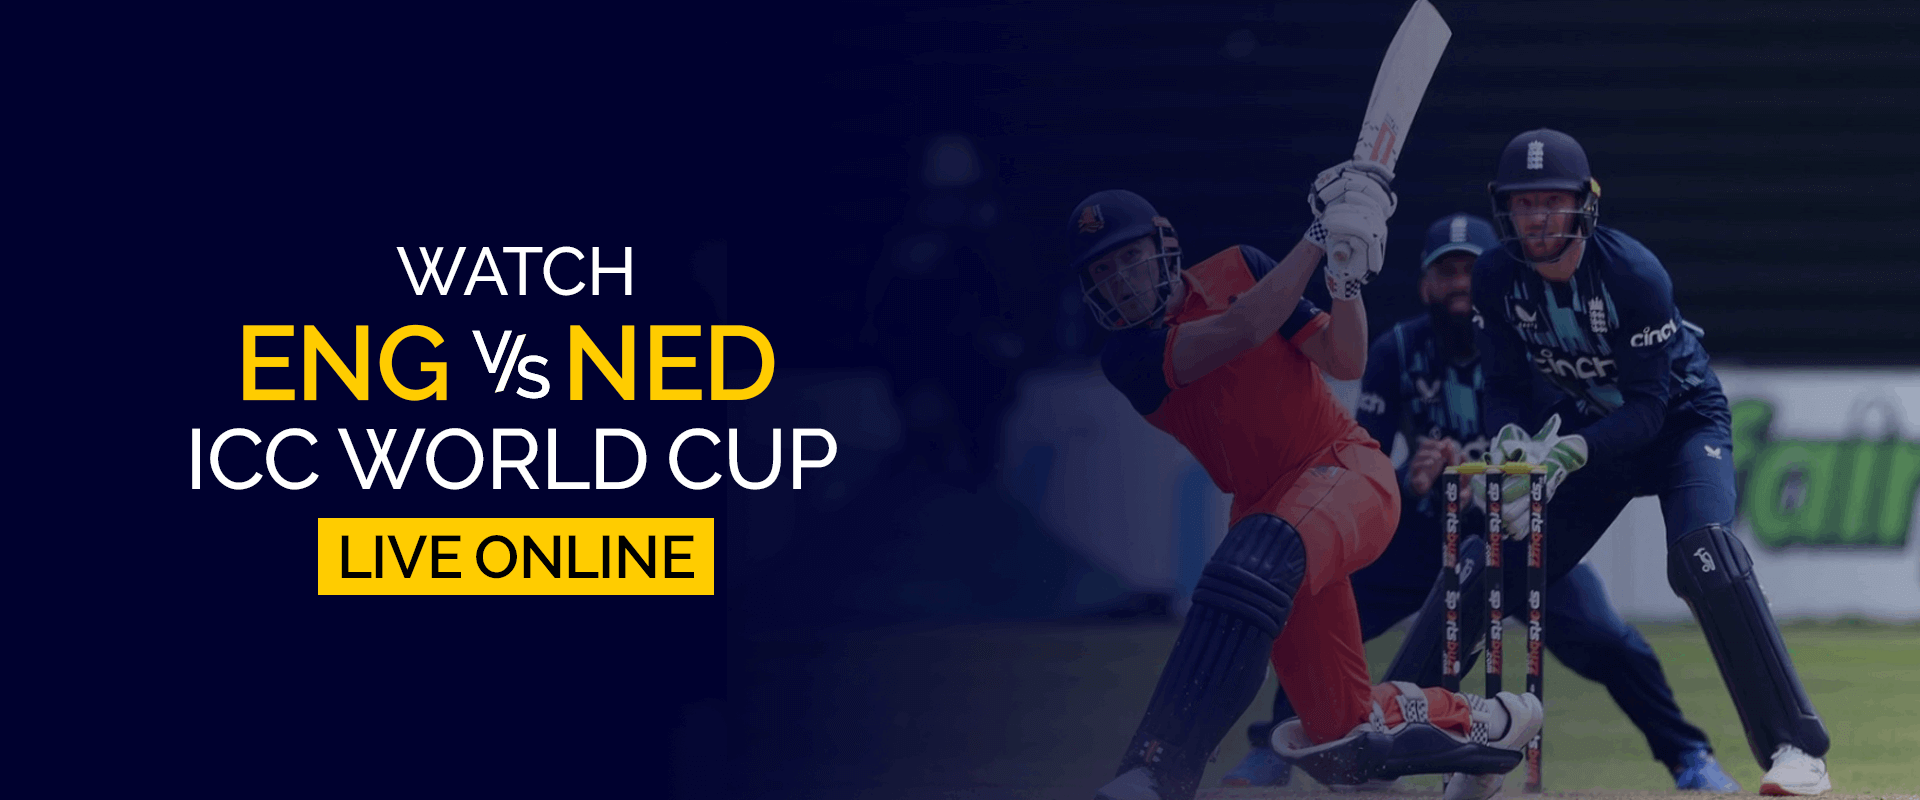 How to Watch England vs Netherlands ICC World Cup Live Online